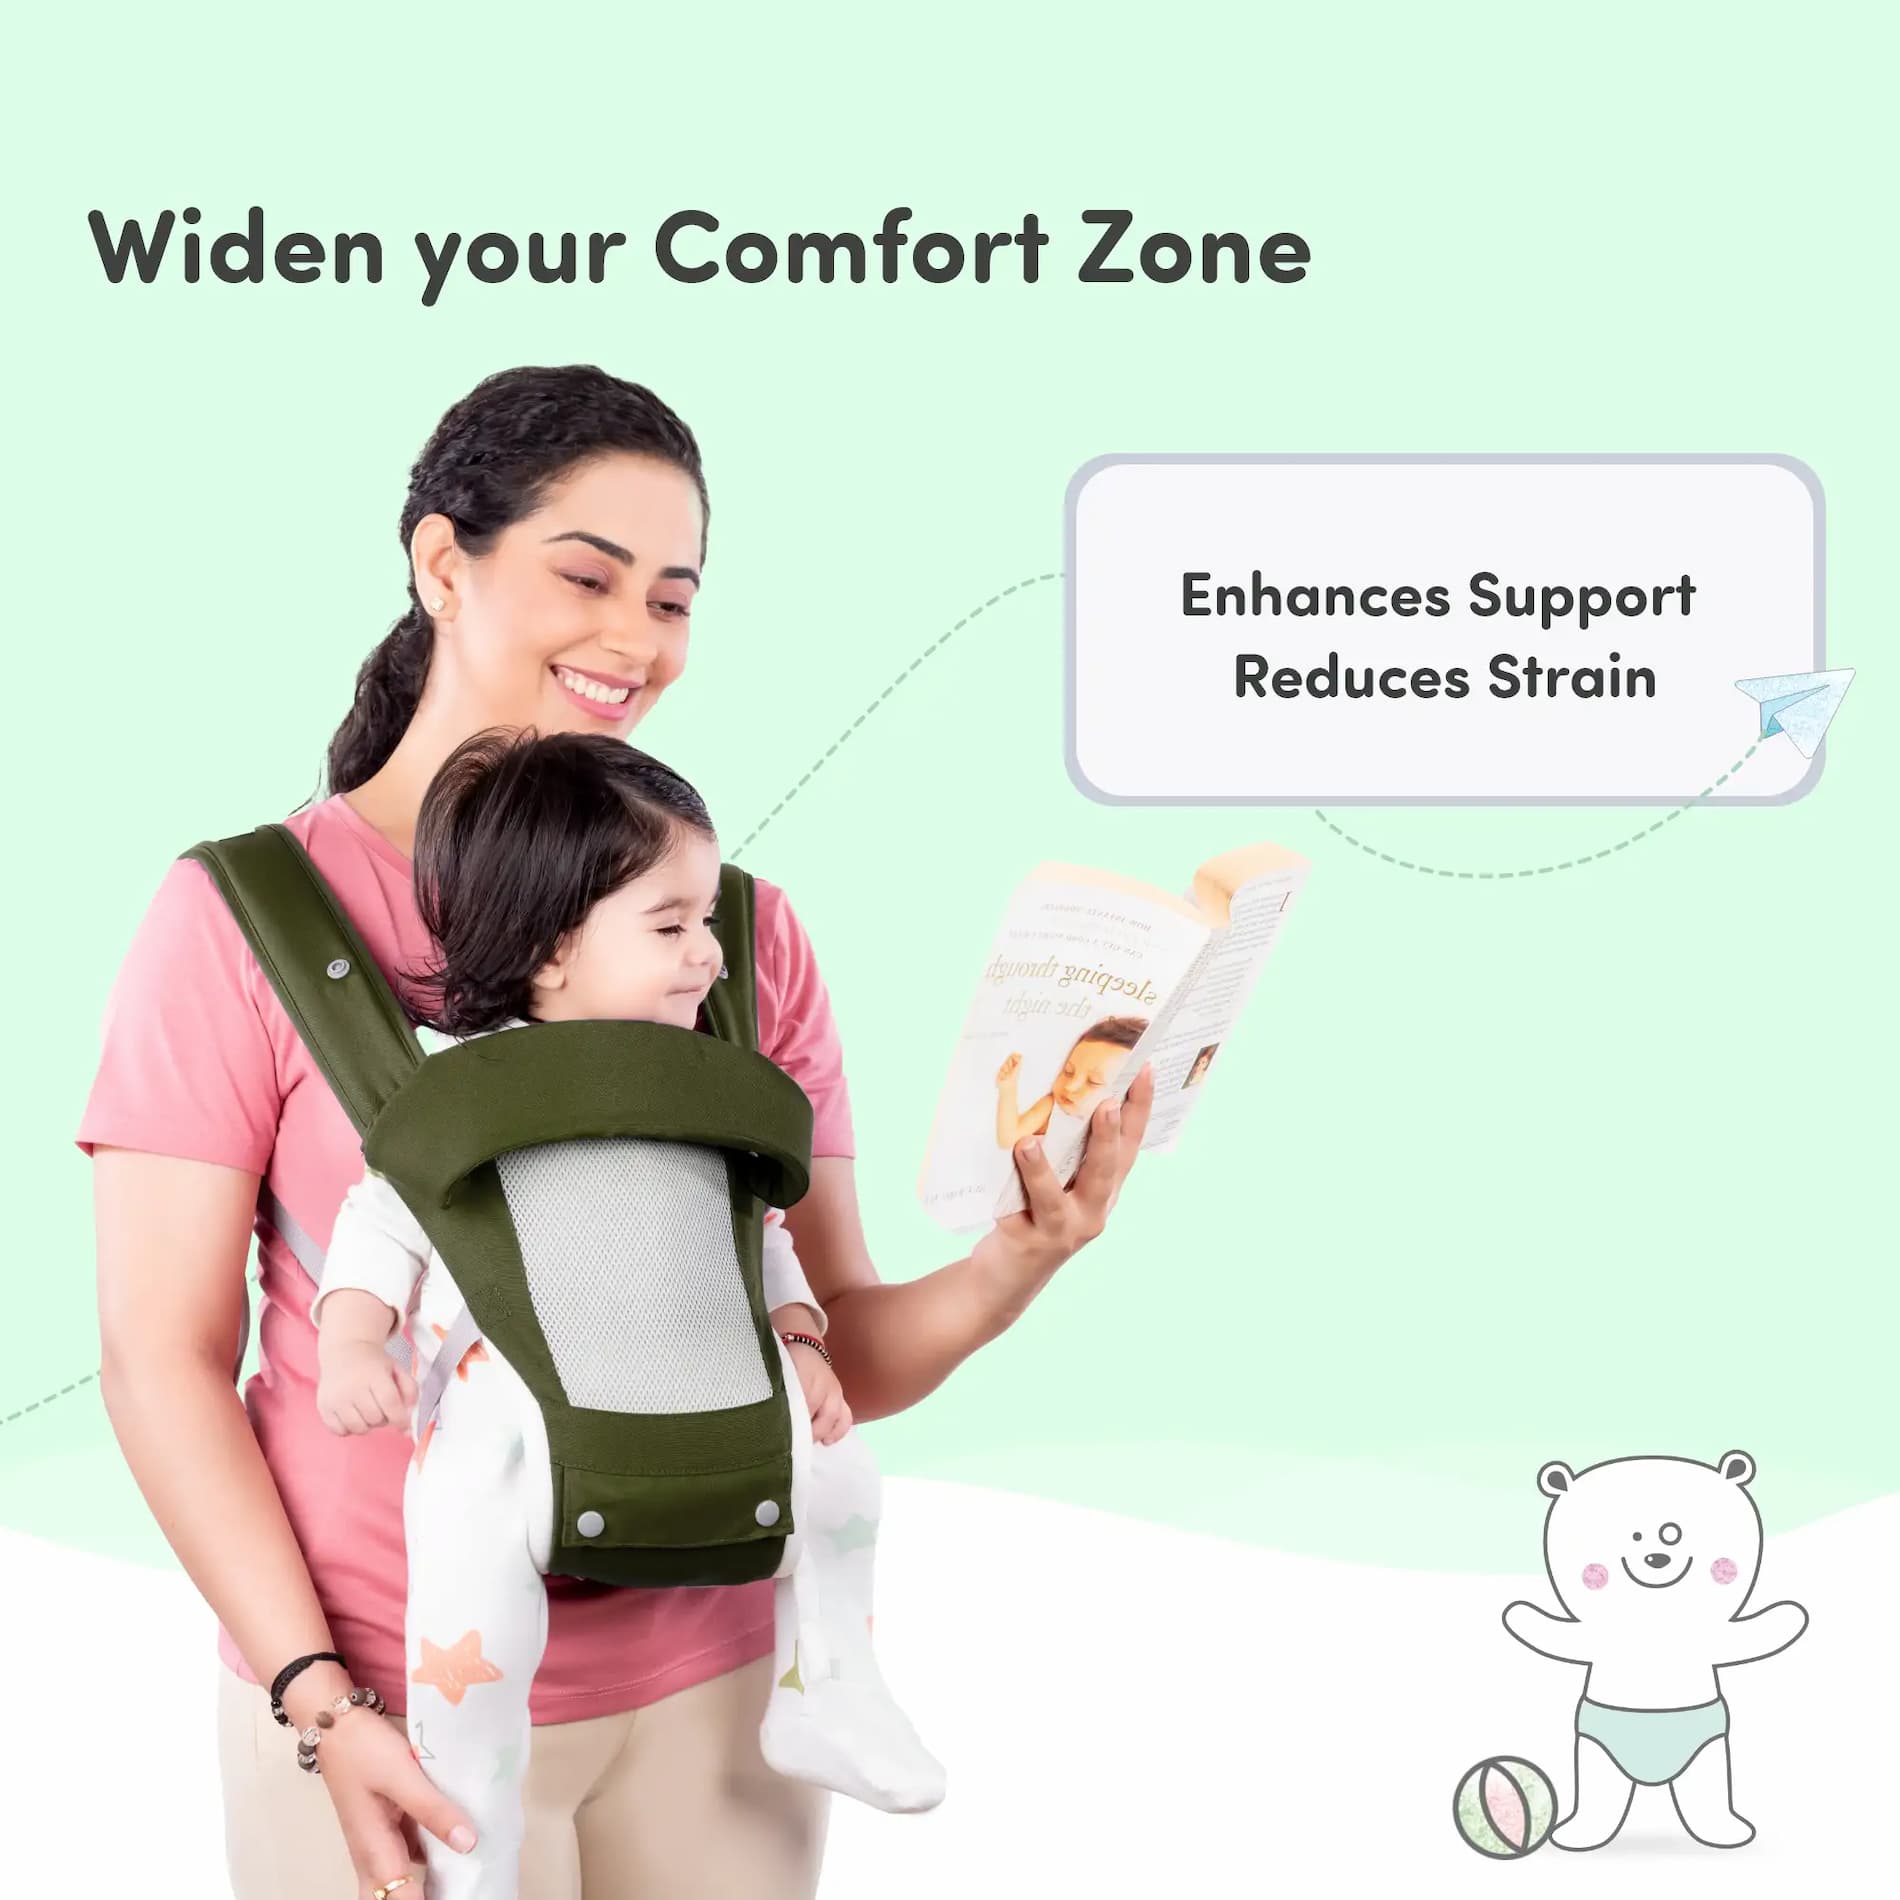 Vista Baby Carrier Bag for 0 to 3 Year Baby with 9 Comfortable Carrying Positions | Wider Waist Belt | Ergonomic Hip Seat | Safety Strap Buckle - Green